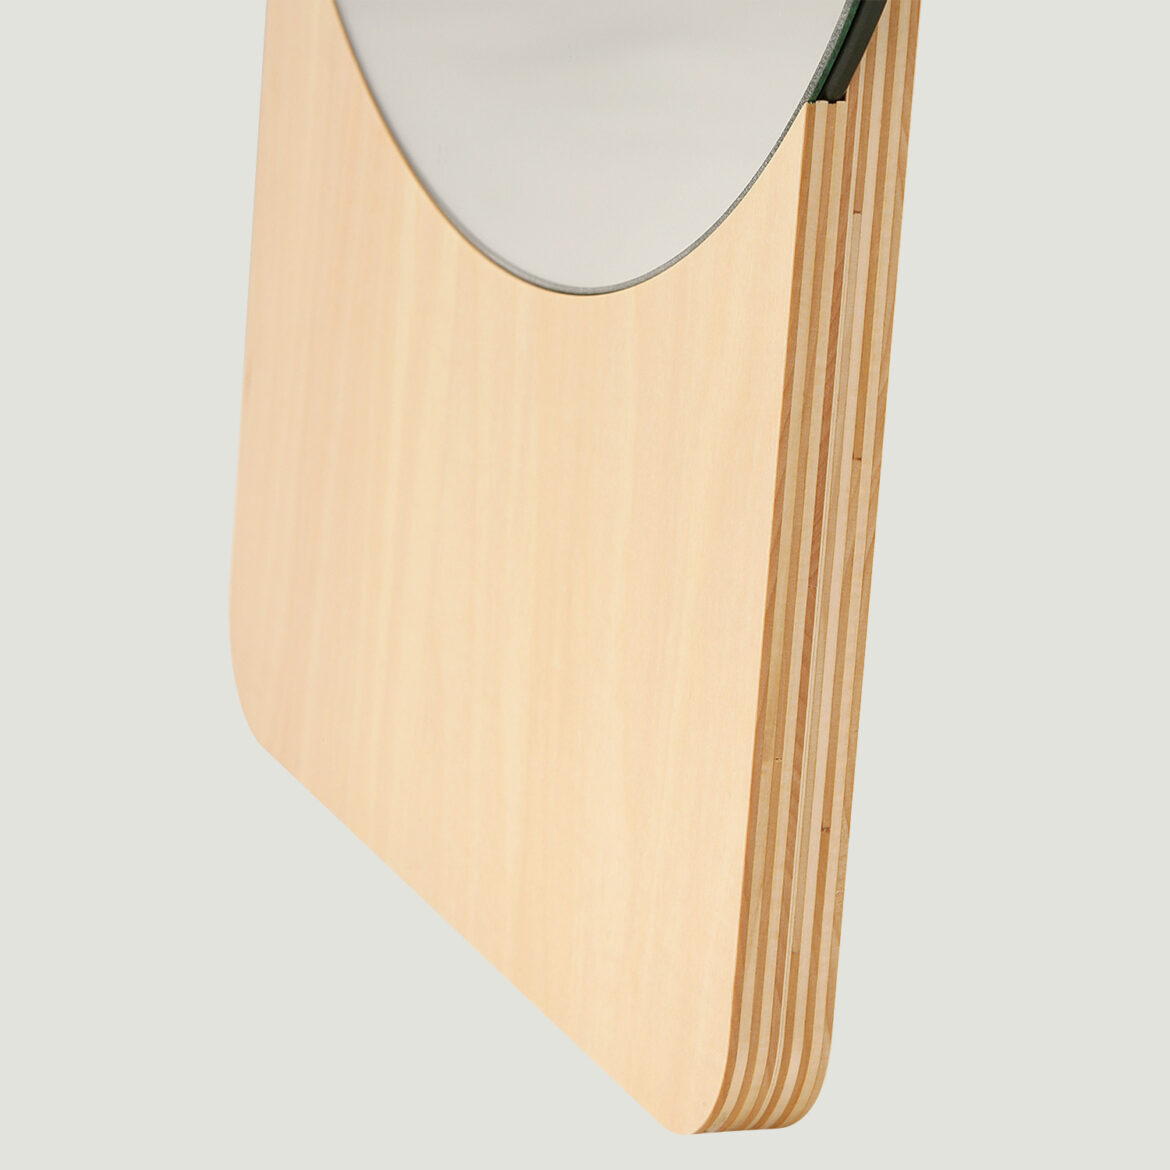 STANDING MIRROR (natural)